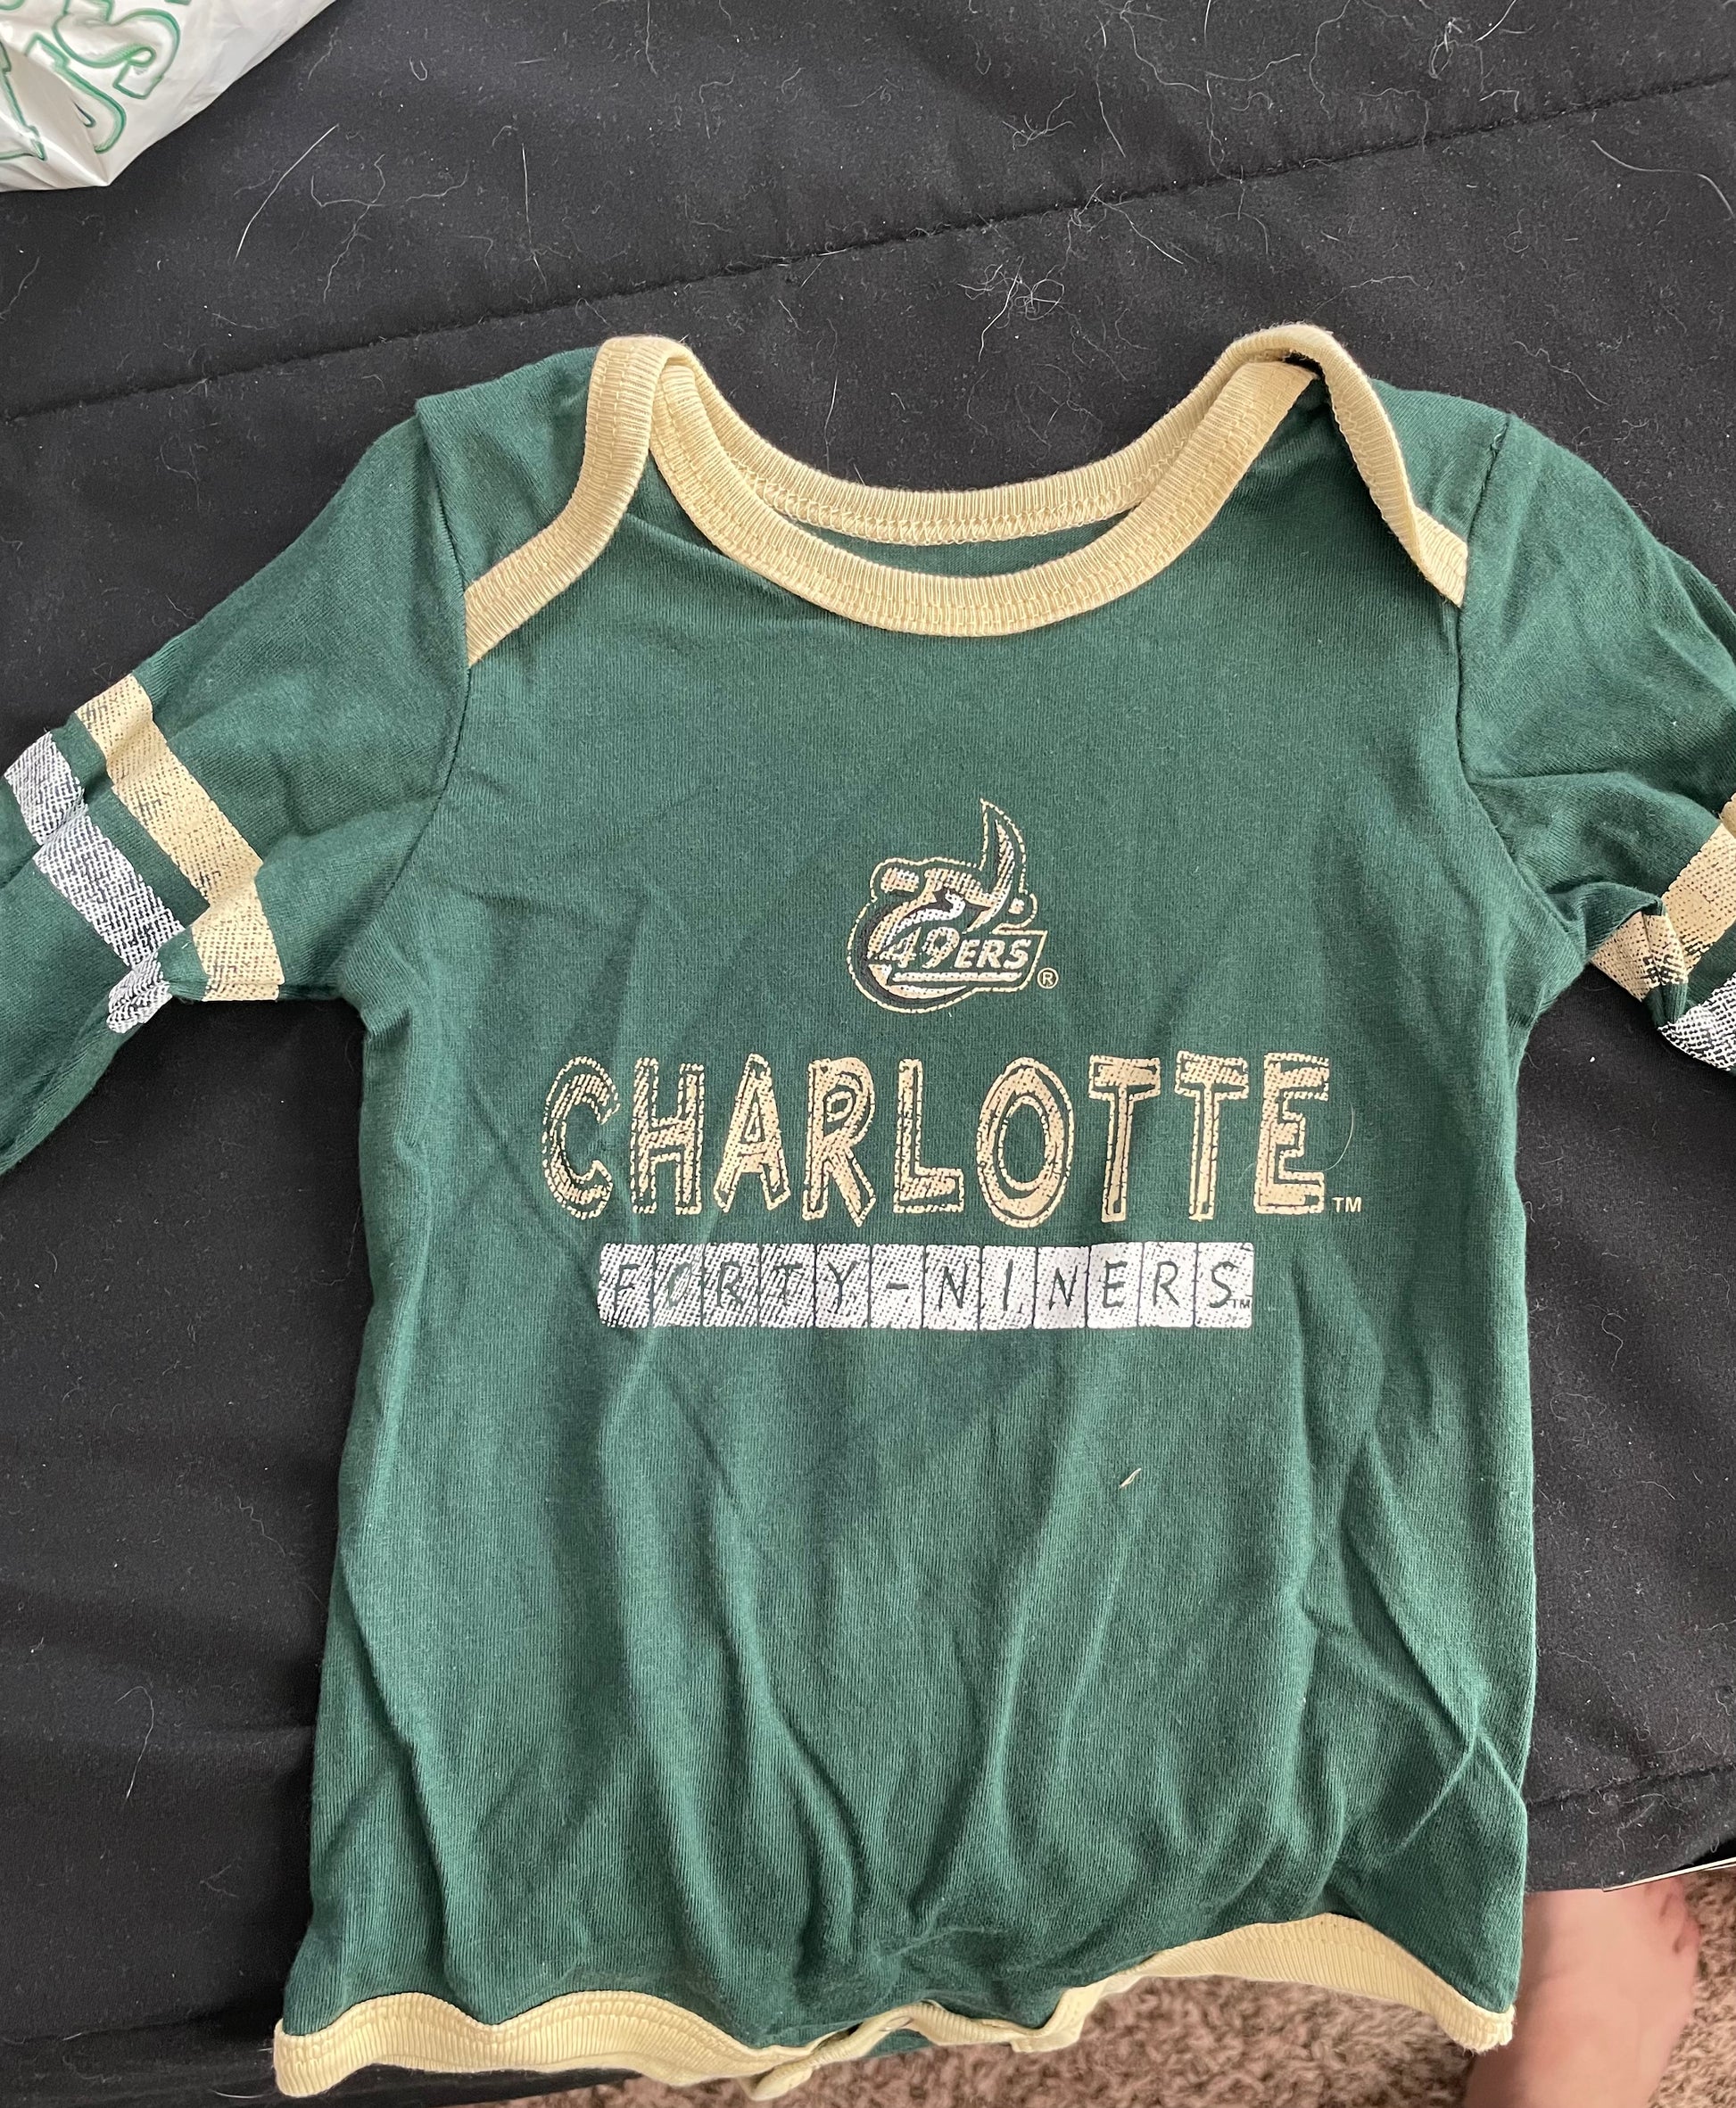 49ers newborn outfit